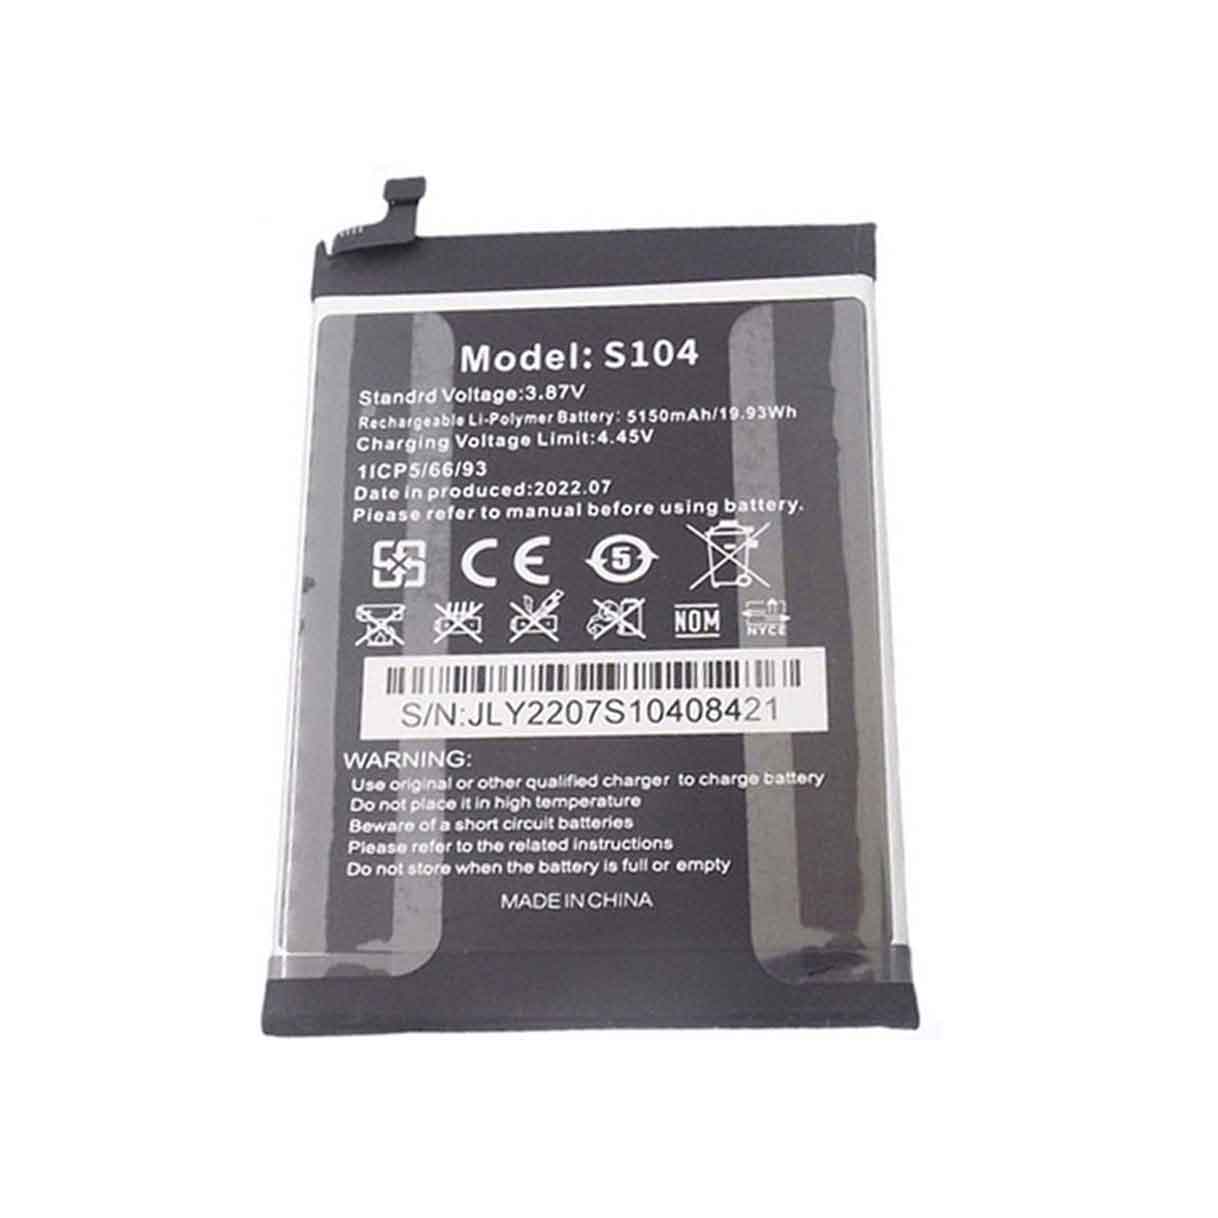 replace S104 battery